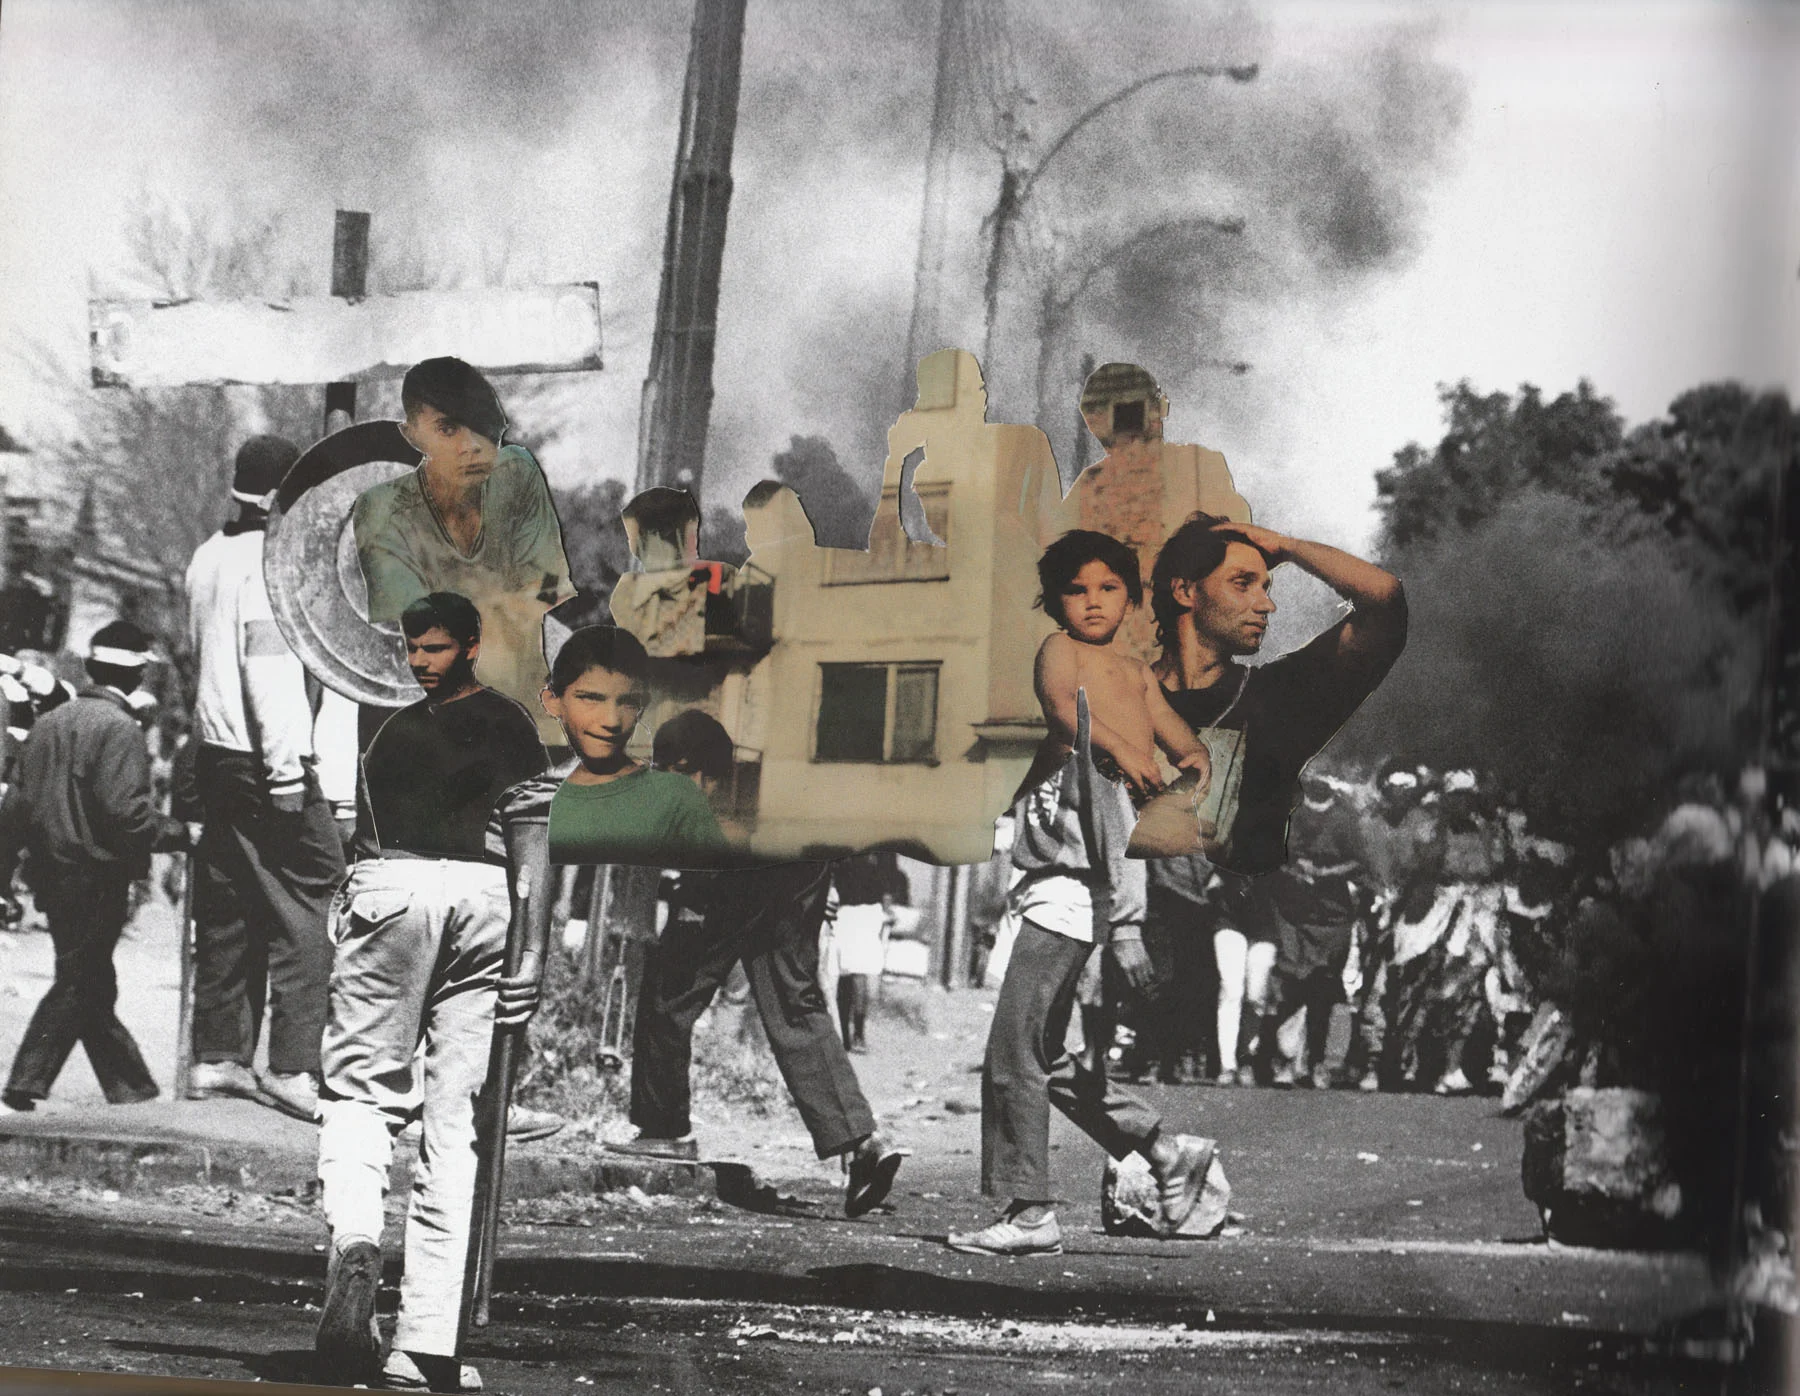 A photo collage: the main image depicts a riot of some sort, while images of people are overlayed.